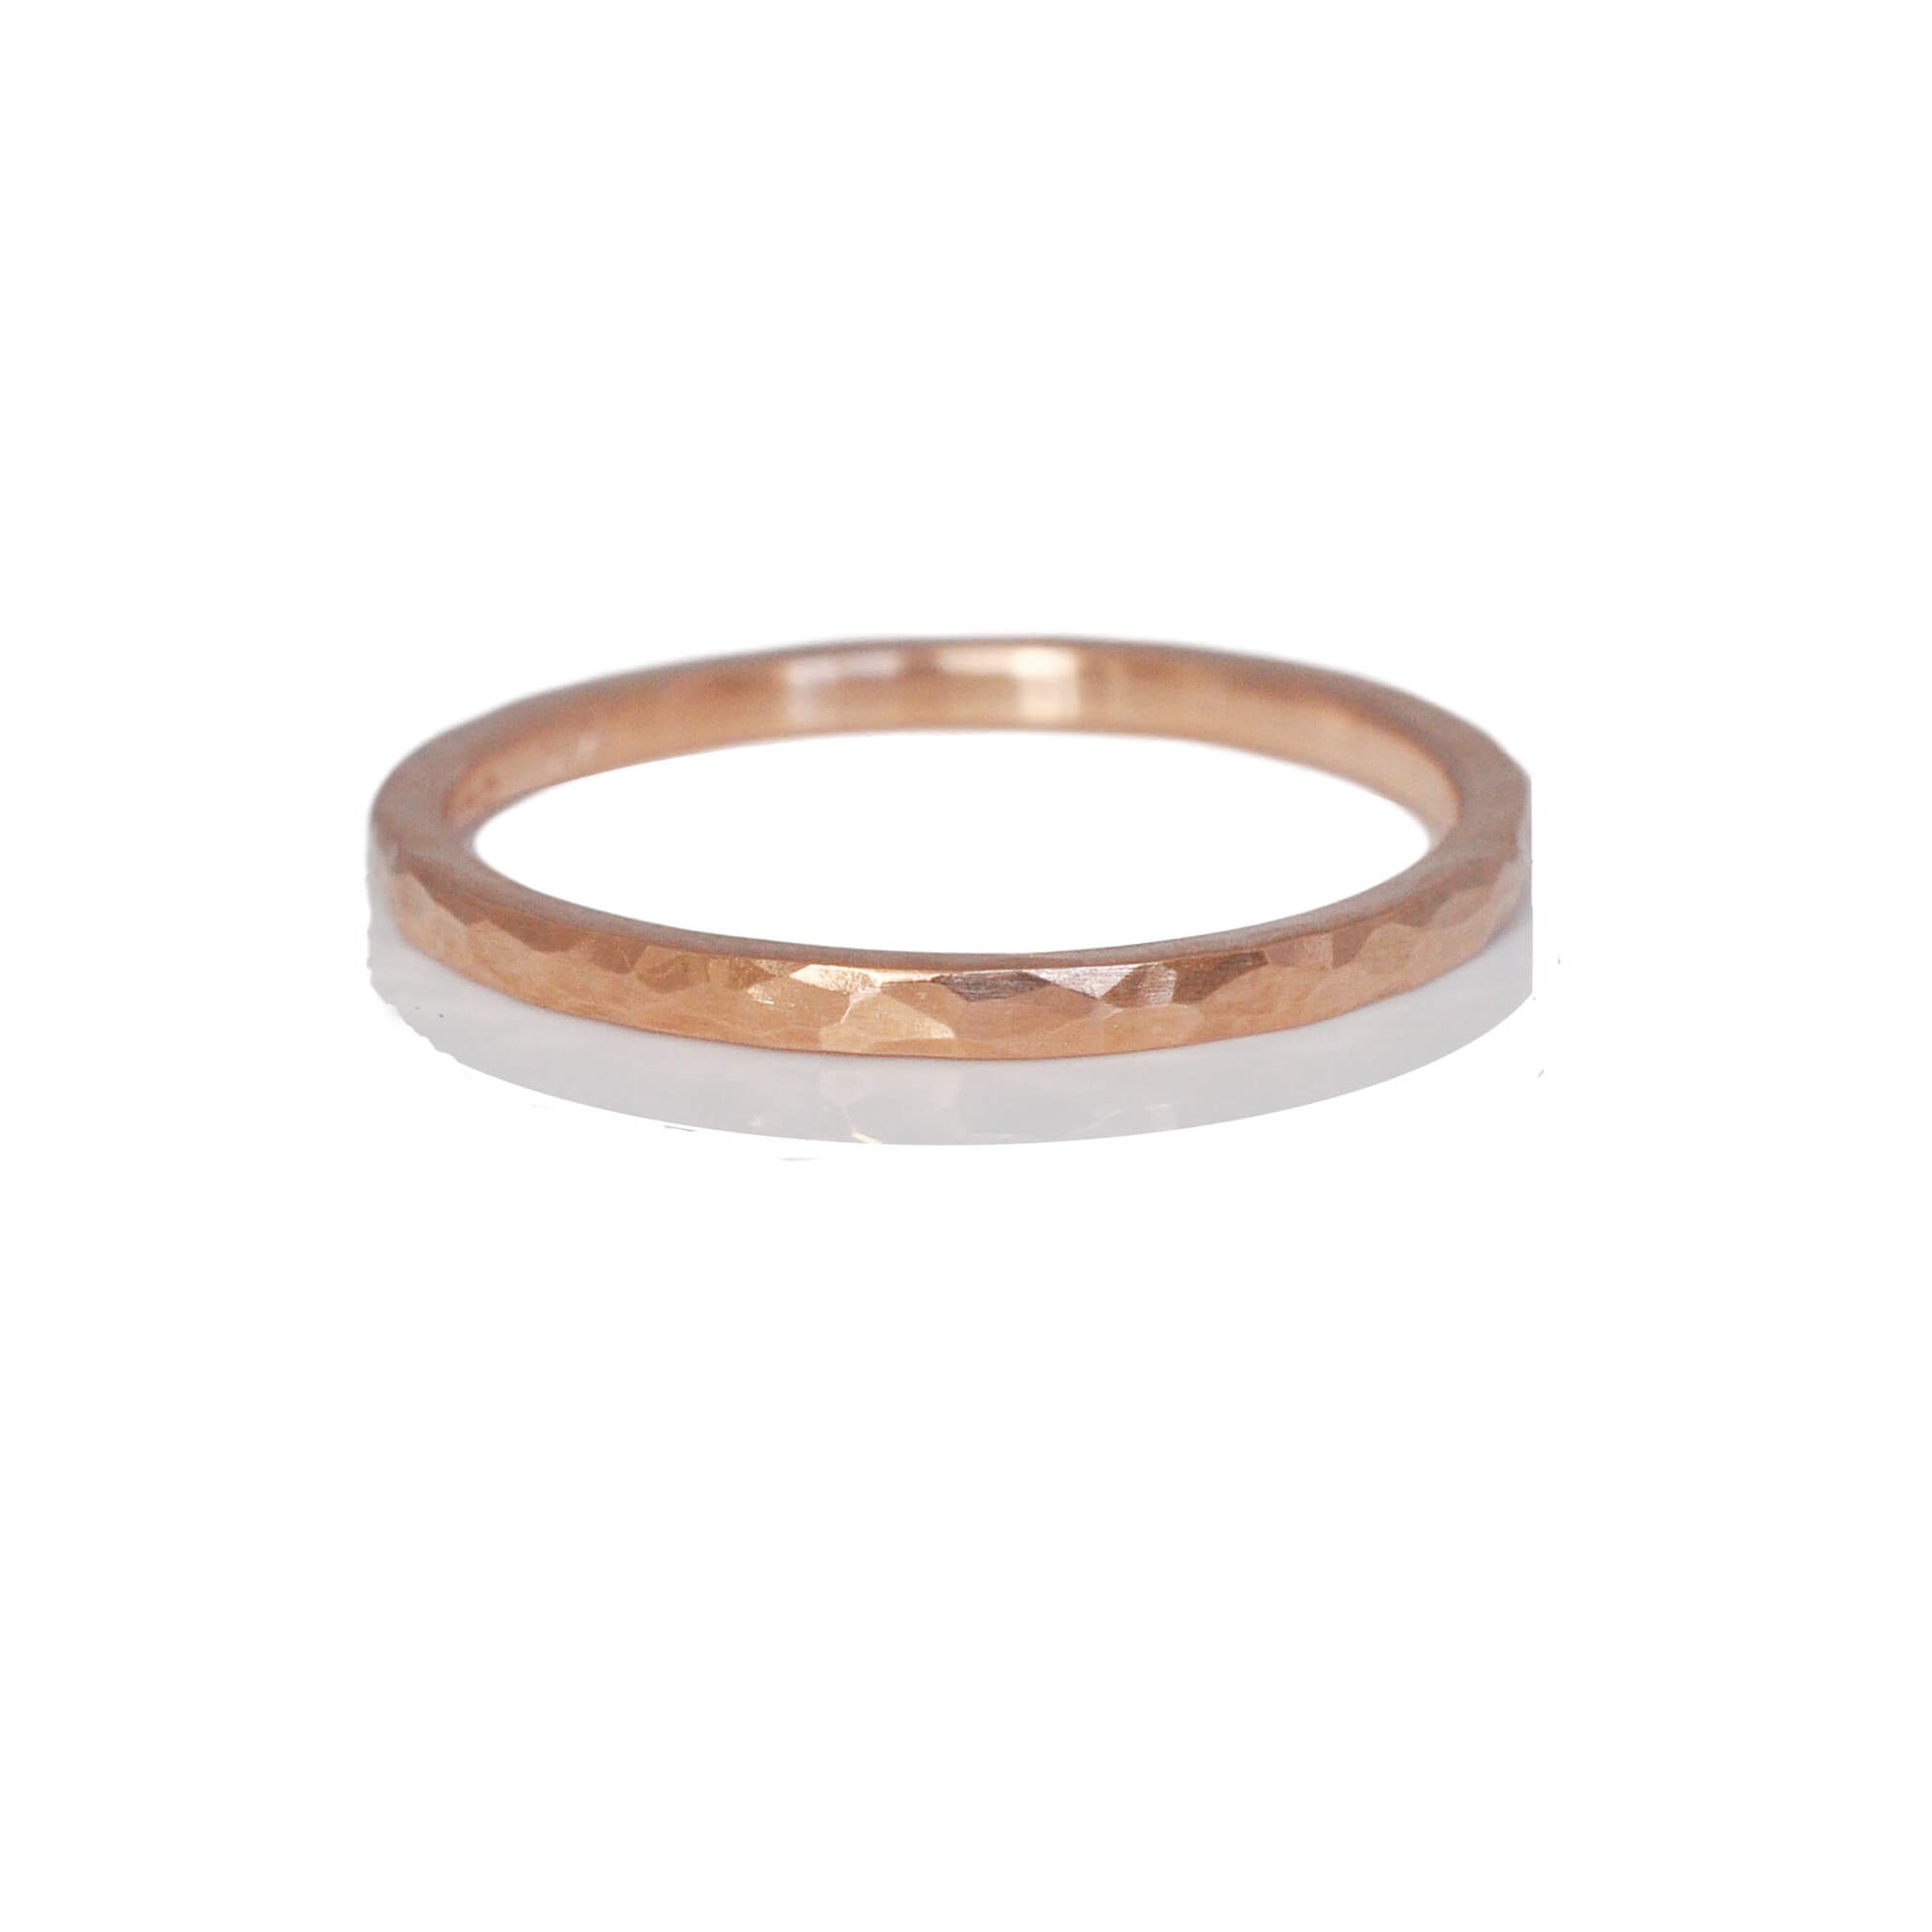 Hammered rose gold wedding band in a stackable 1.5mm size. Handmade by EC Design Jewelry in Minneapolis, MN.